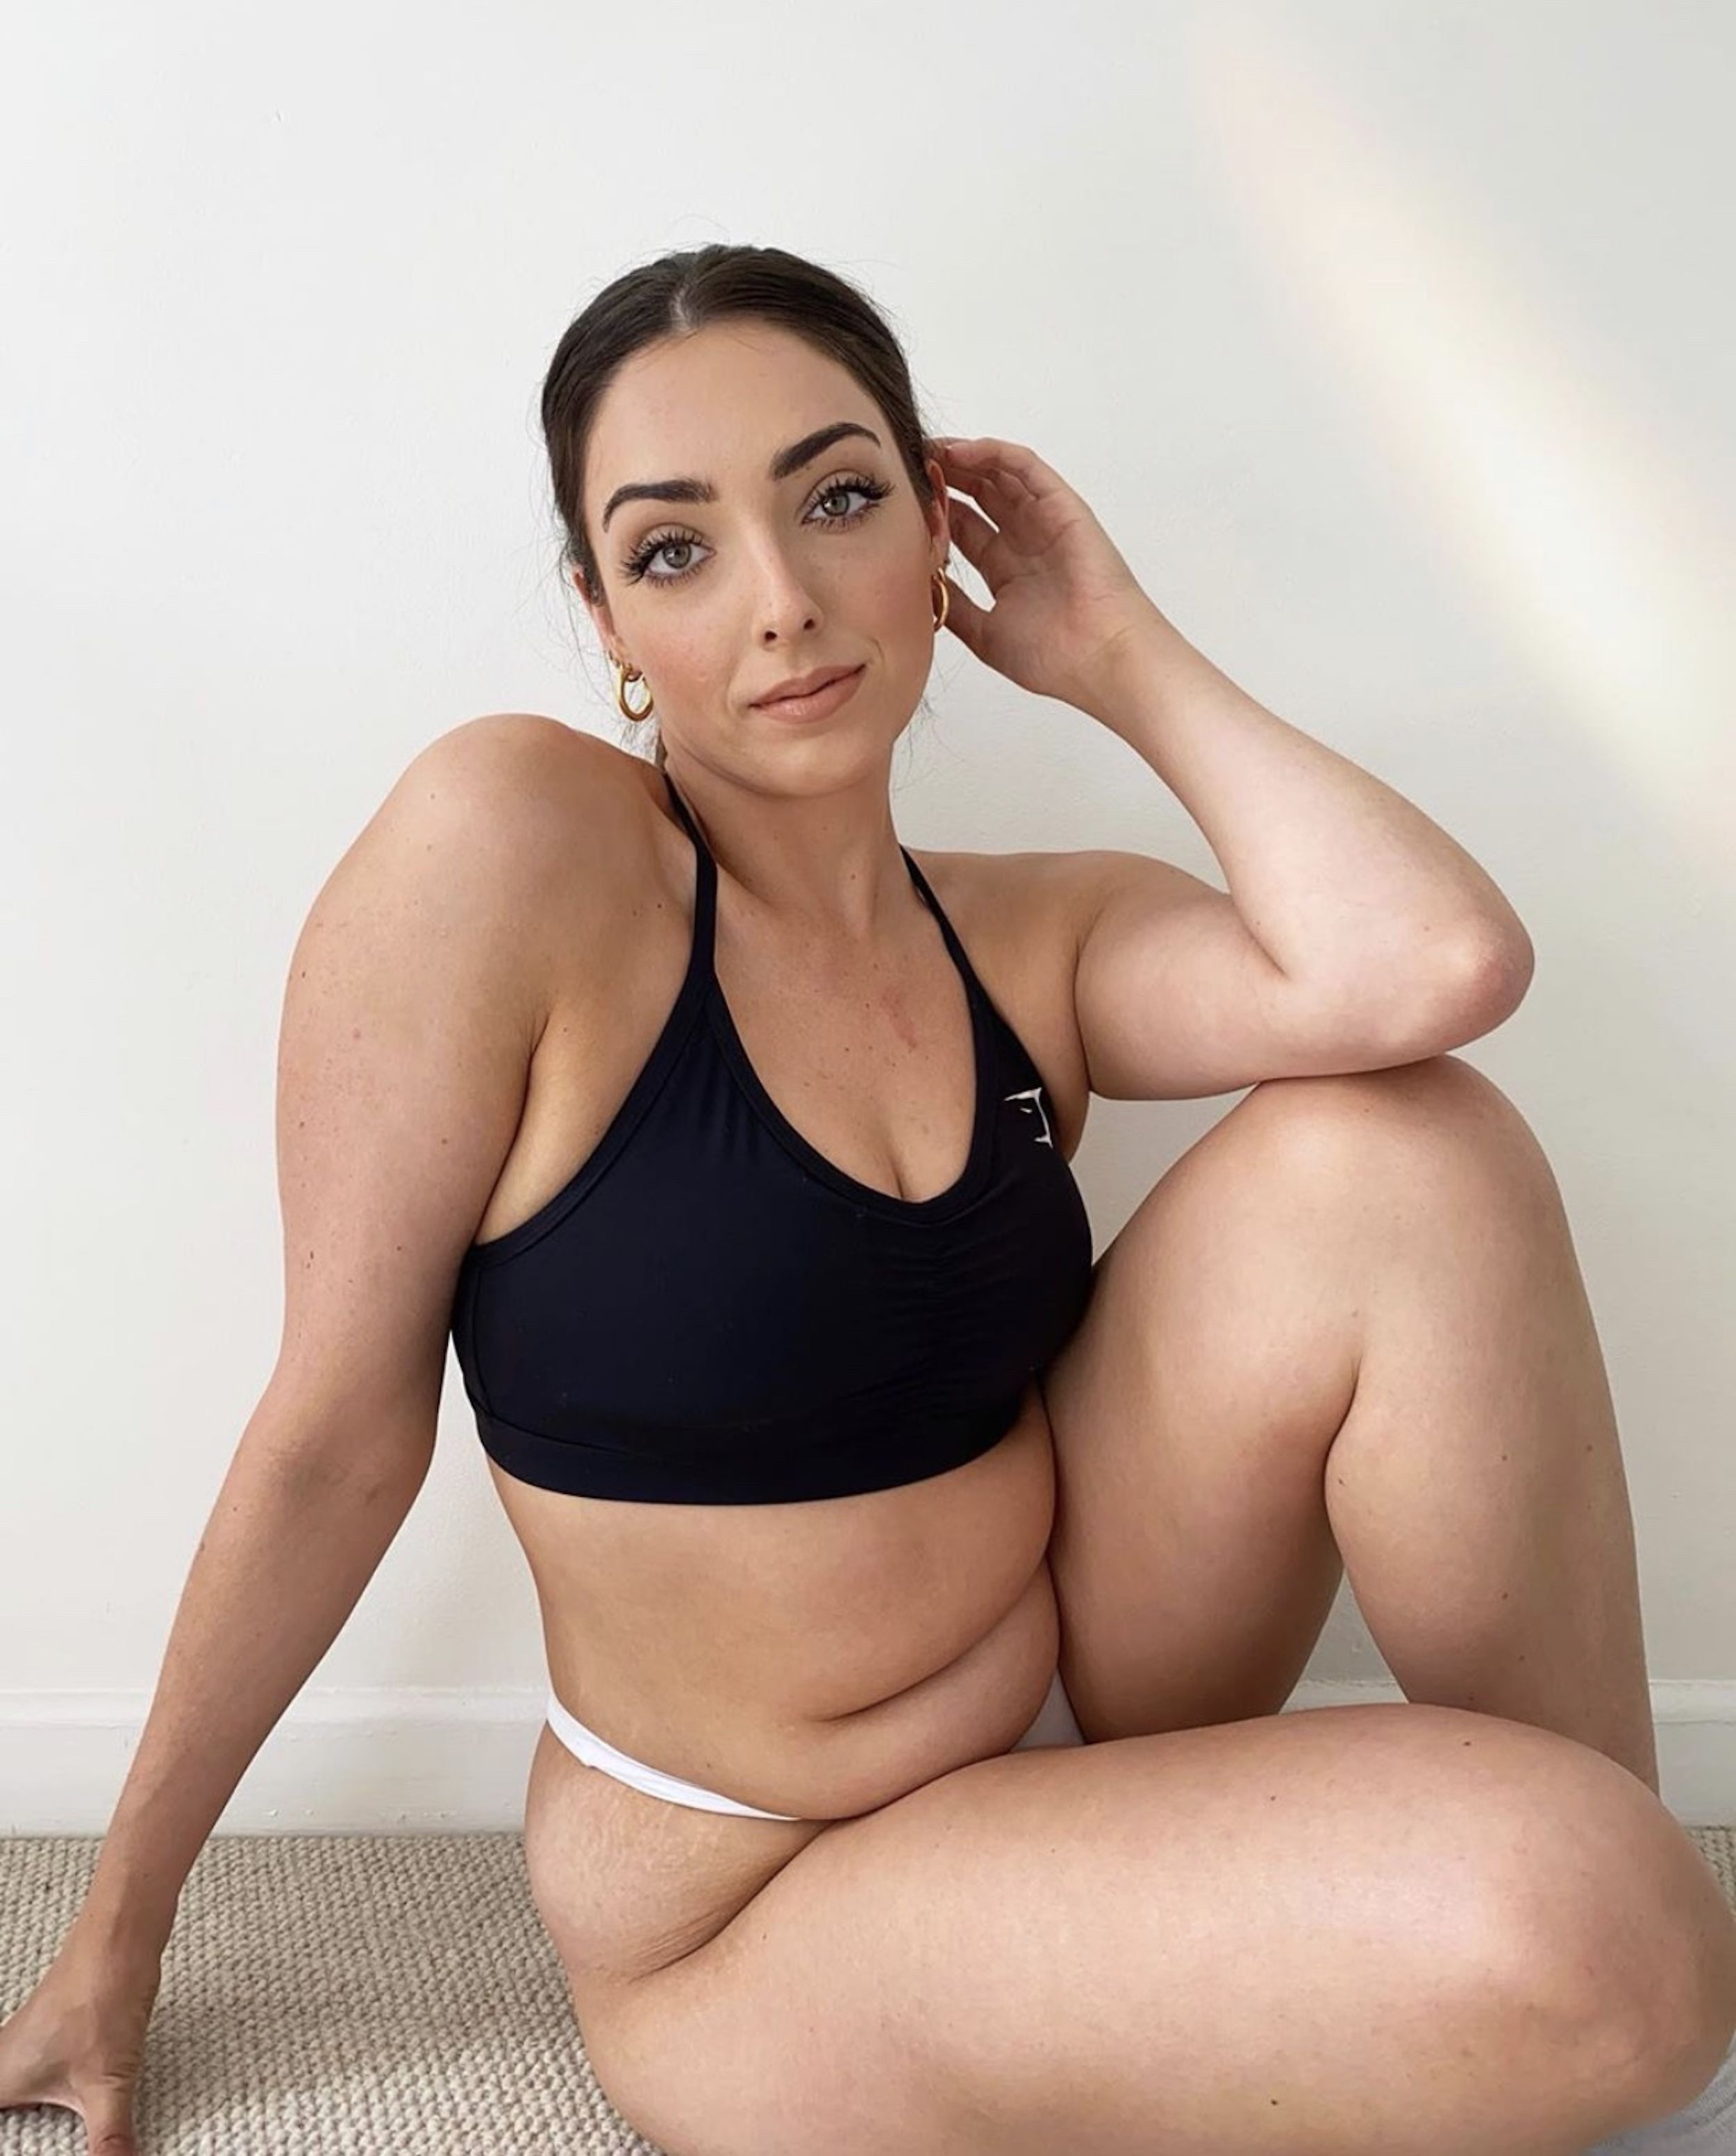 Gymshark's viral photo: the body confidence influencer behind it